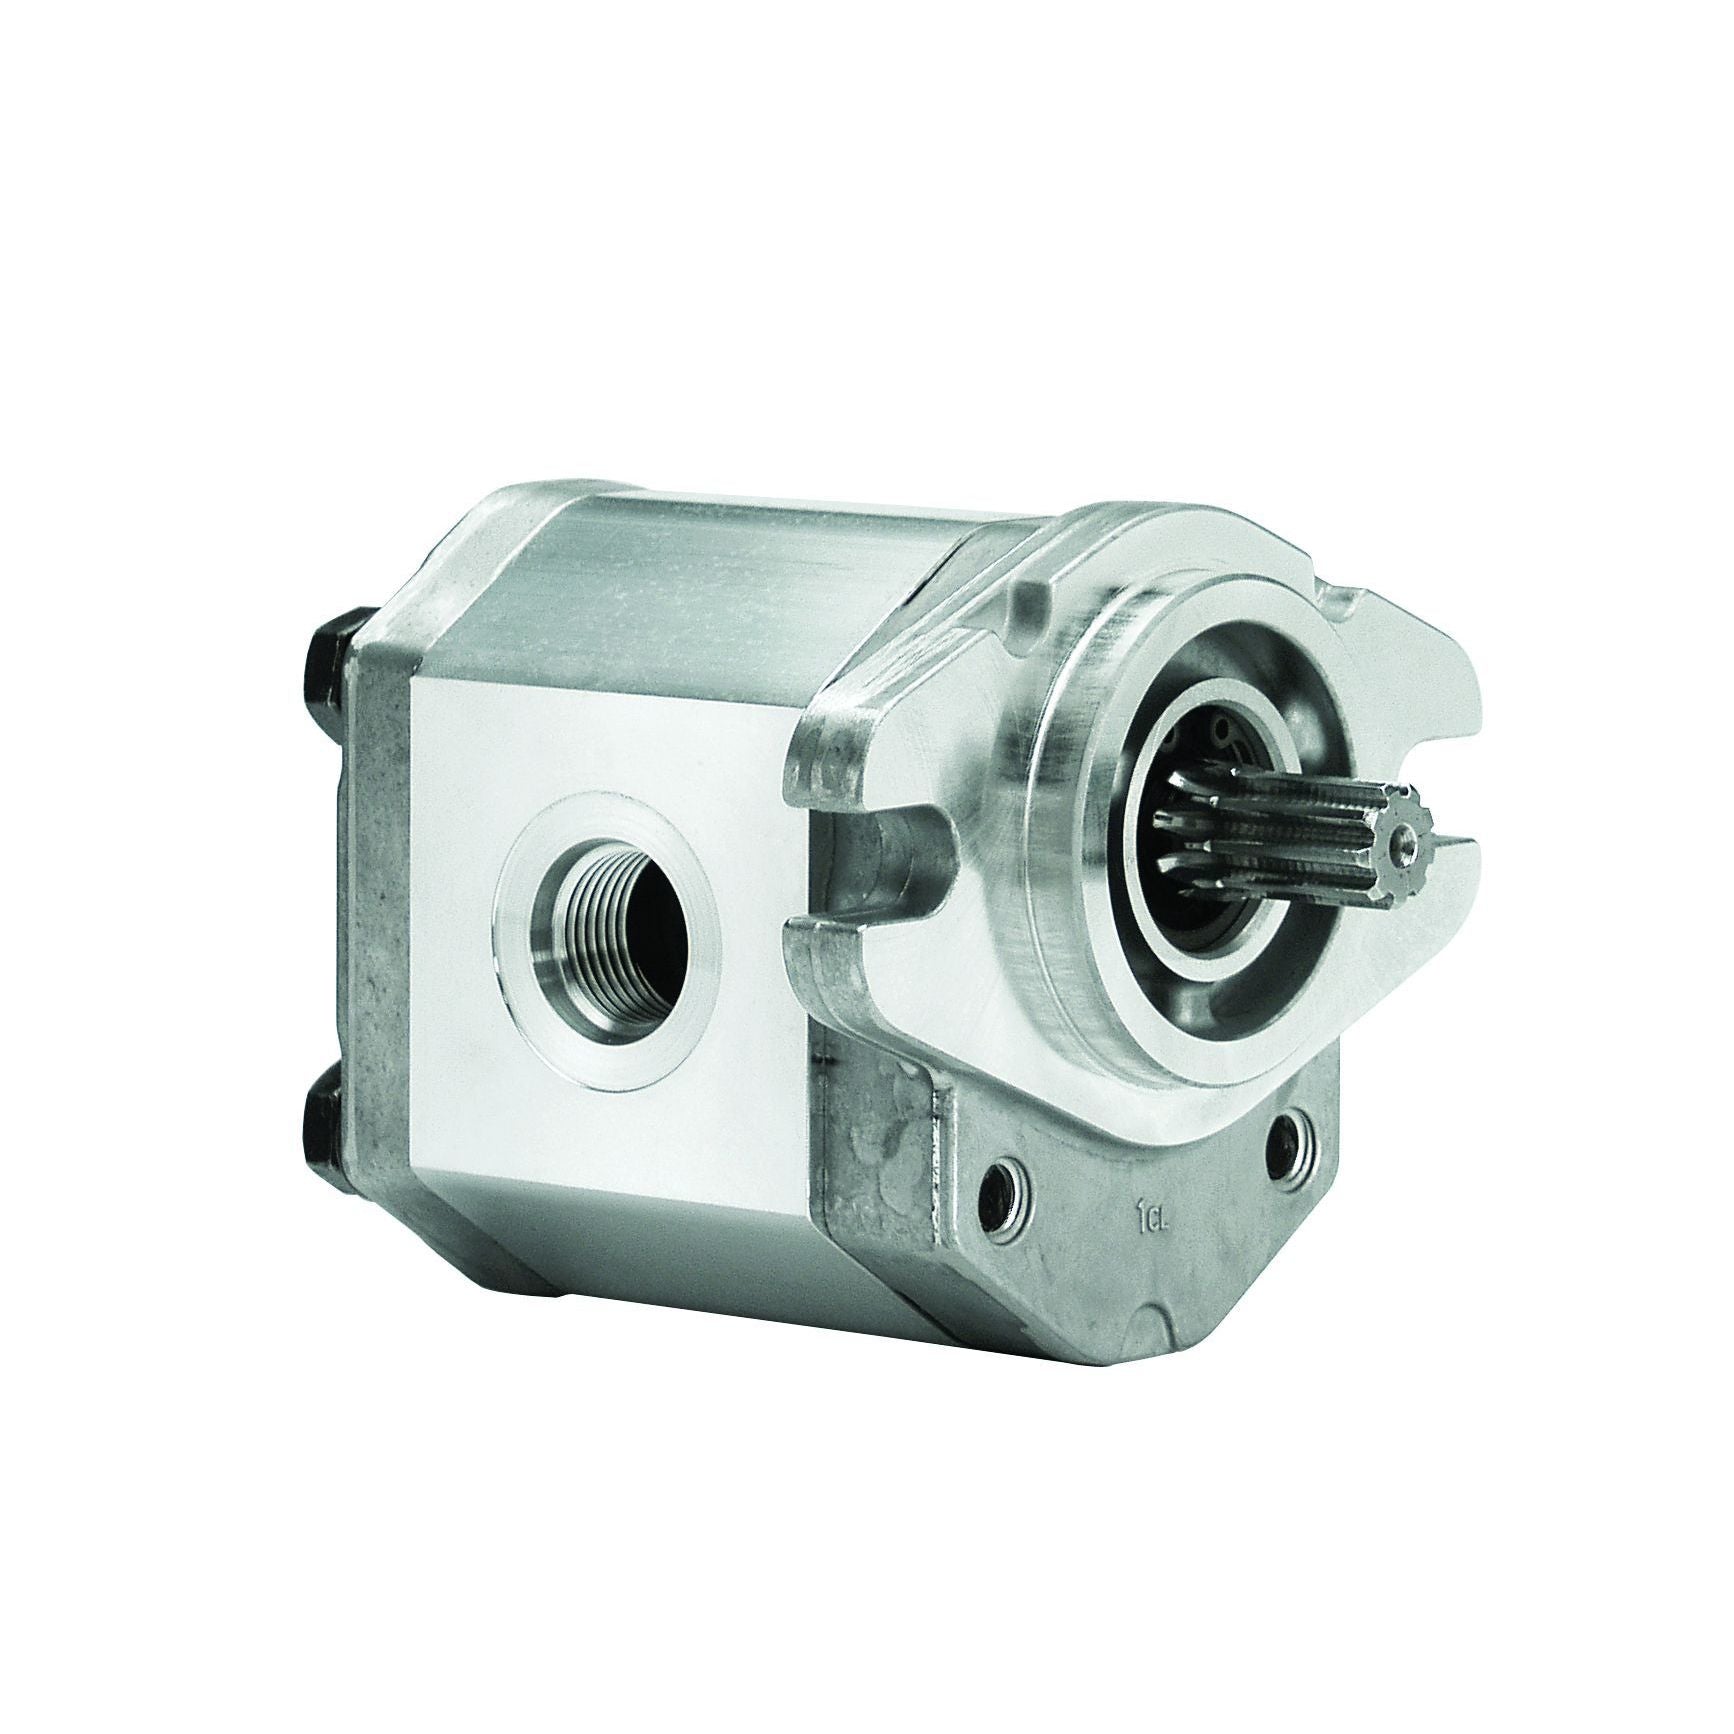 ALP1A-S-7-S1 : Marzocchi Gear Pump, CCW, 5.2cc (0.3172in3), 2.47 GPM, 3335psi, 3500 RPM, #8 SAE (1/2") In, #6 SAE (3/8") Out, Splined Shaft 9T 20/40DP, SAE AA 2-Bolt Mount